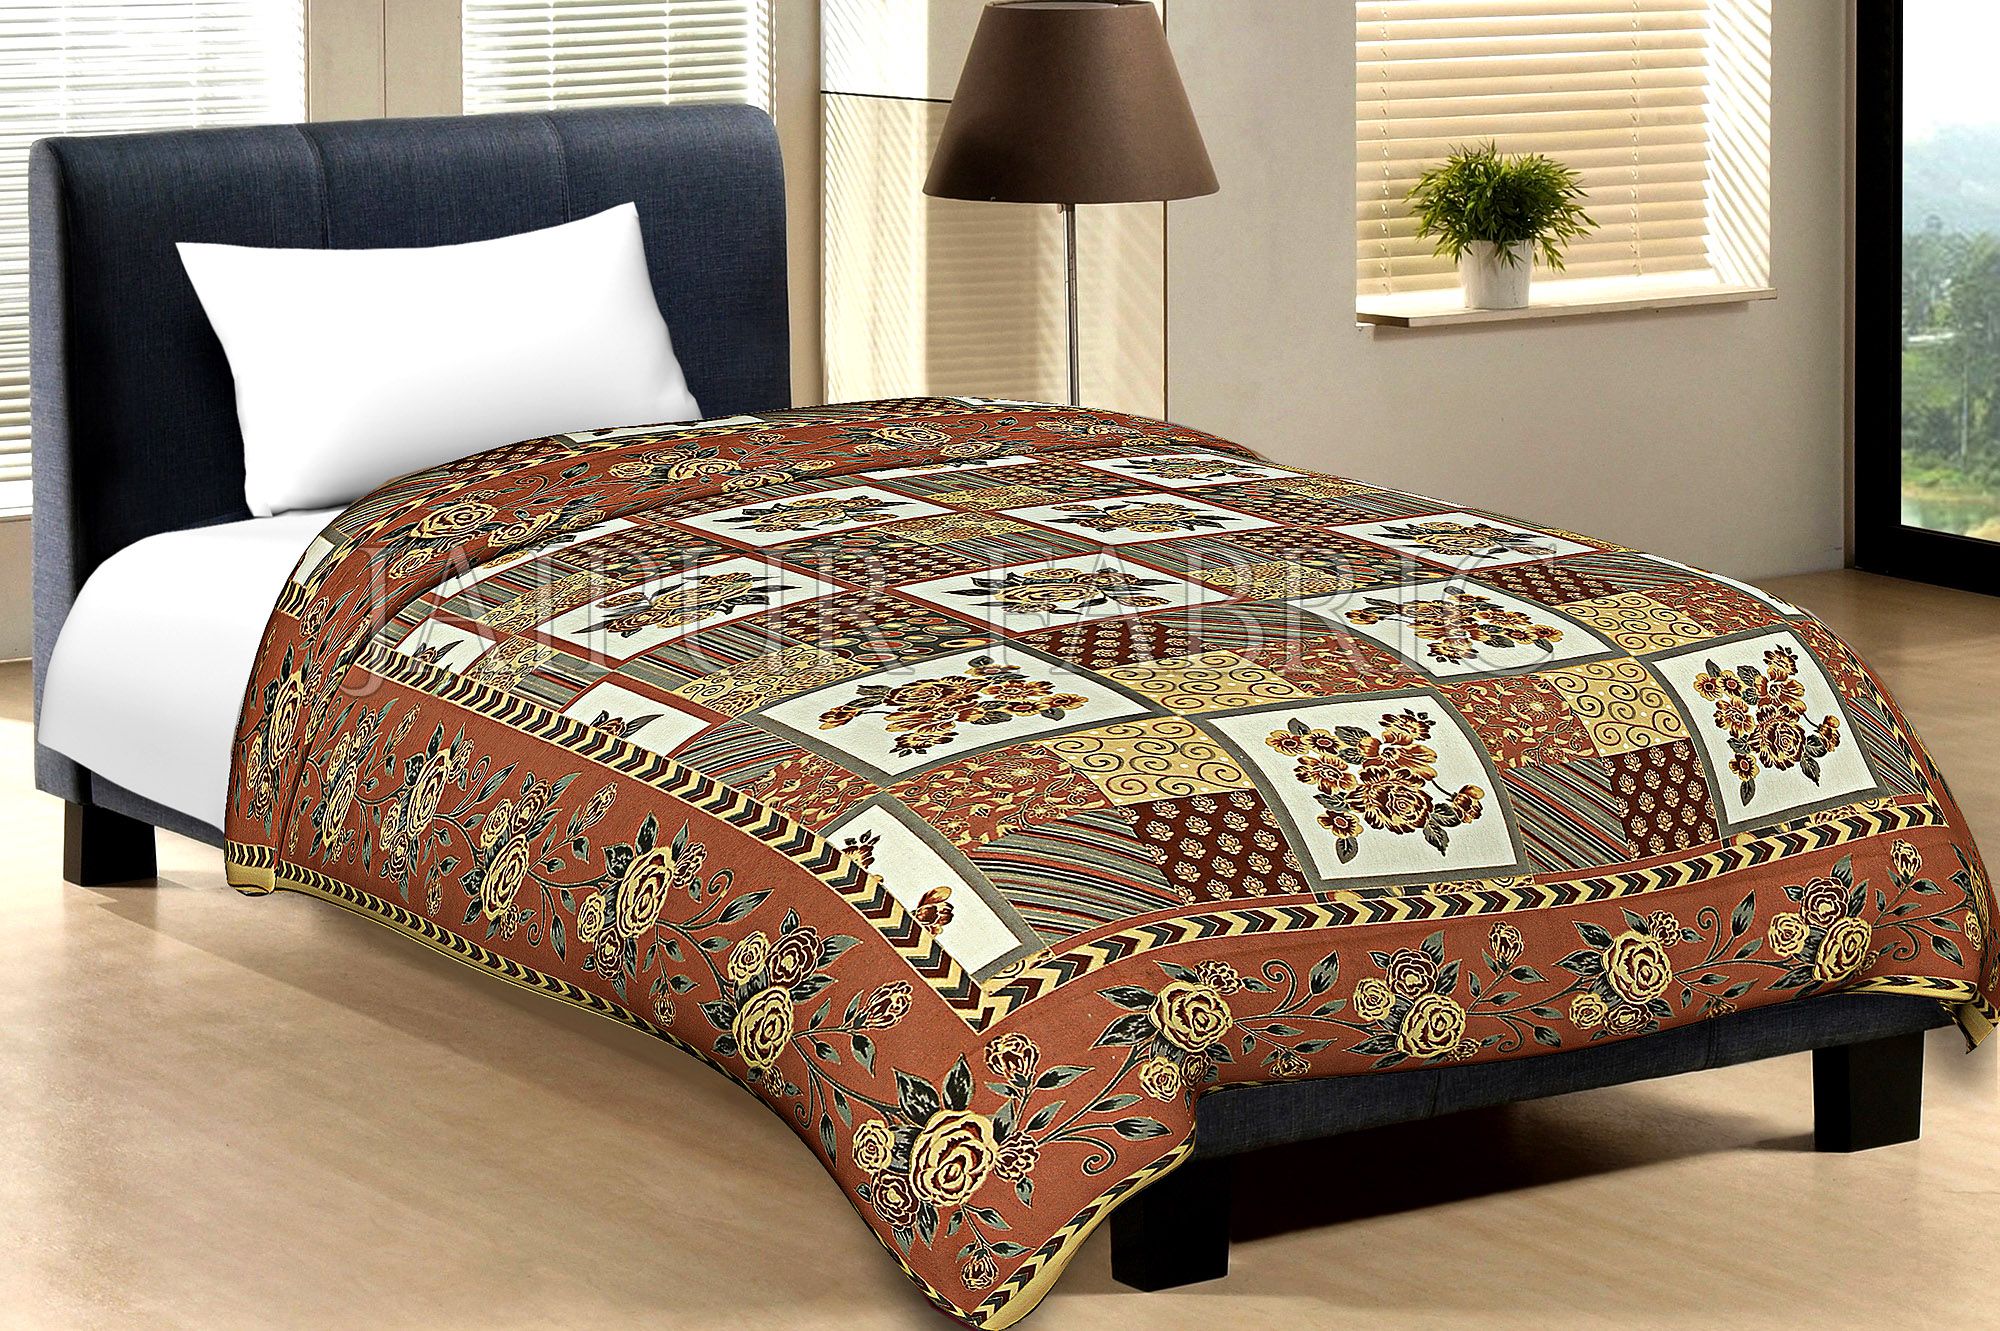 Brown Border Cream Base Flower And Check With Golden Shining Print Cotton Single Bed Sheet With Out Pillow Cover